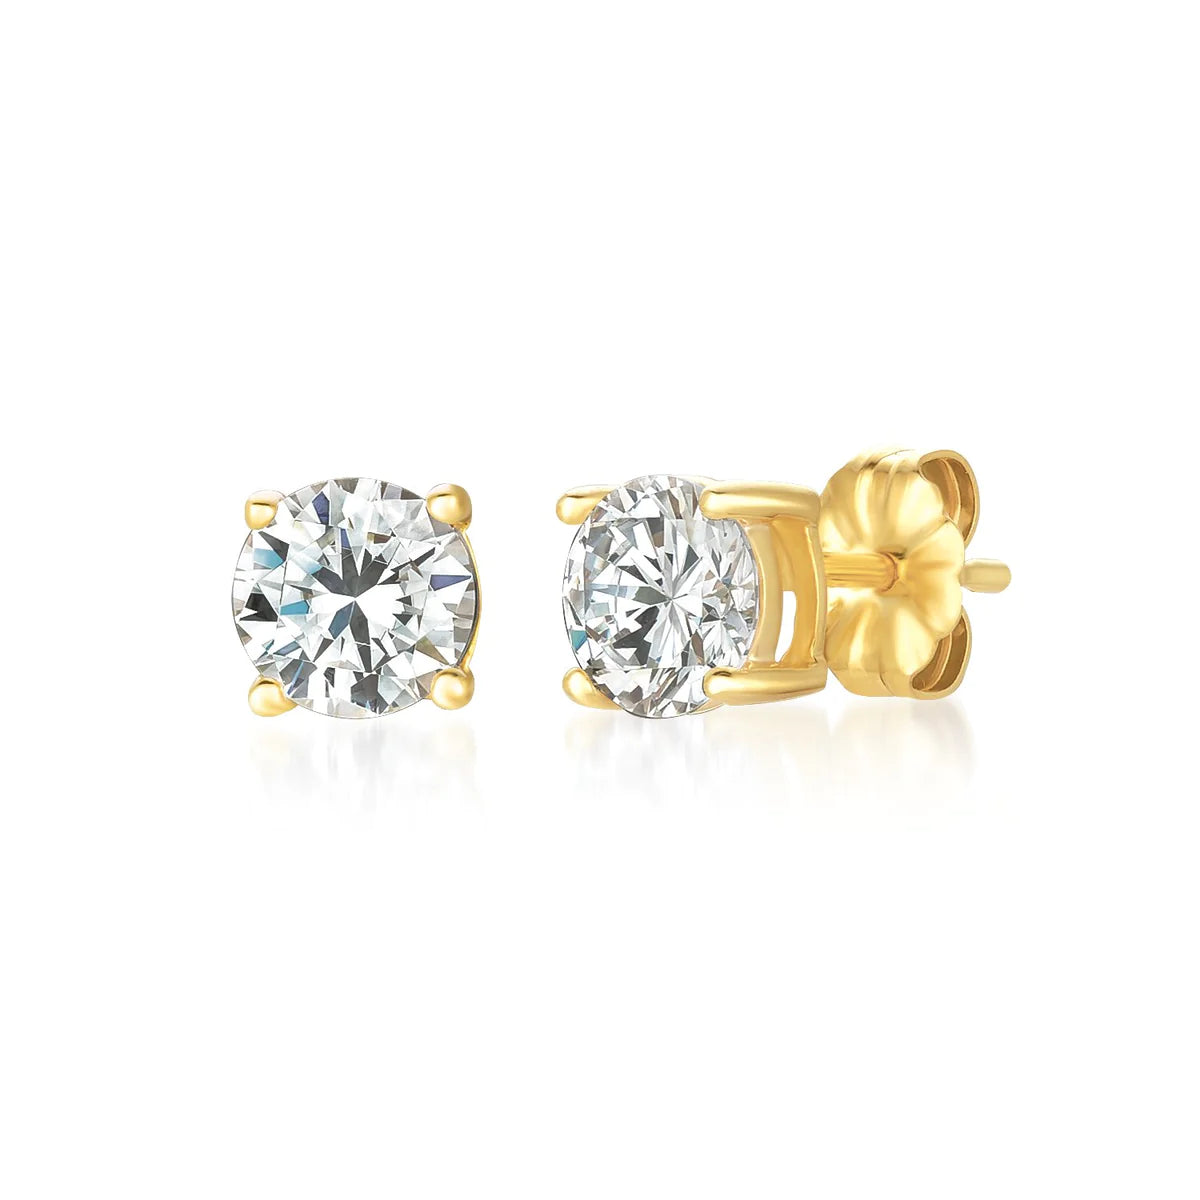 Solitaire Briliant Stud Earrings Finished in 18k Yellow Gold - 1.5 cttw